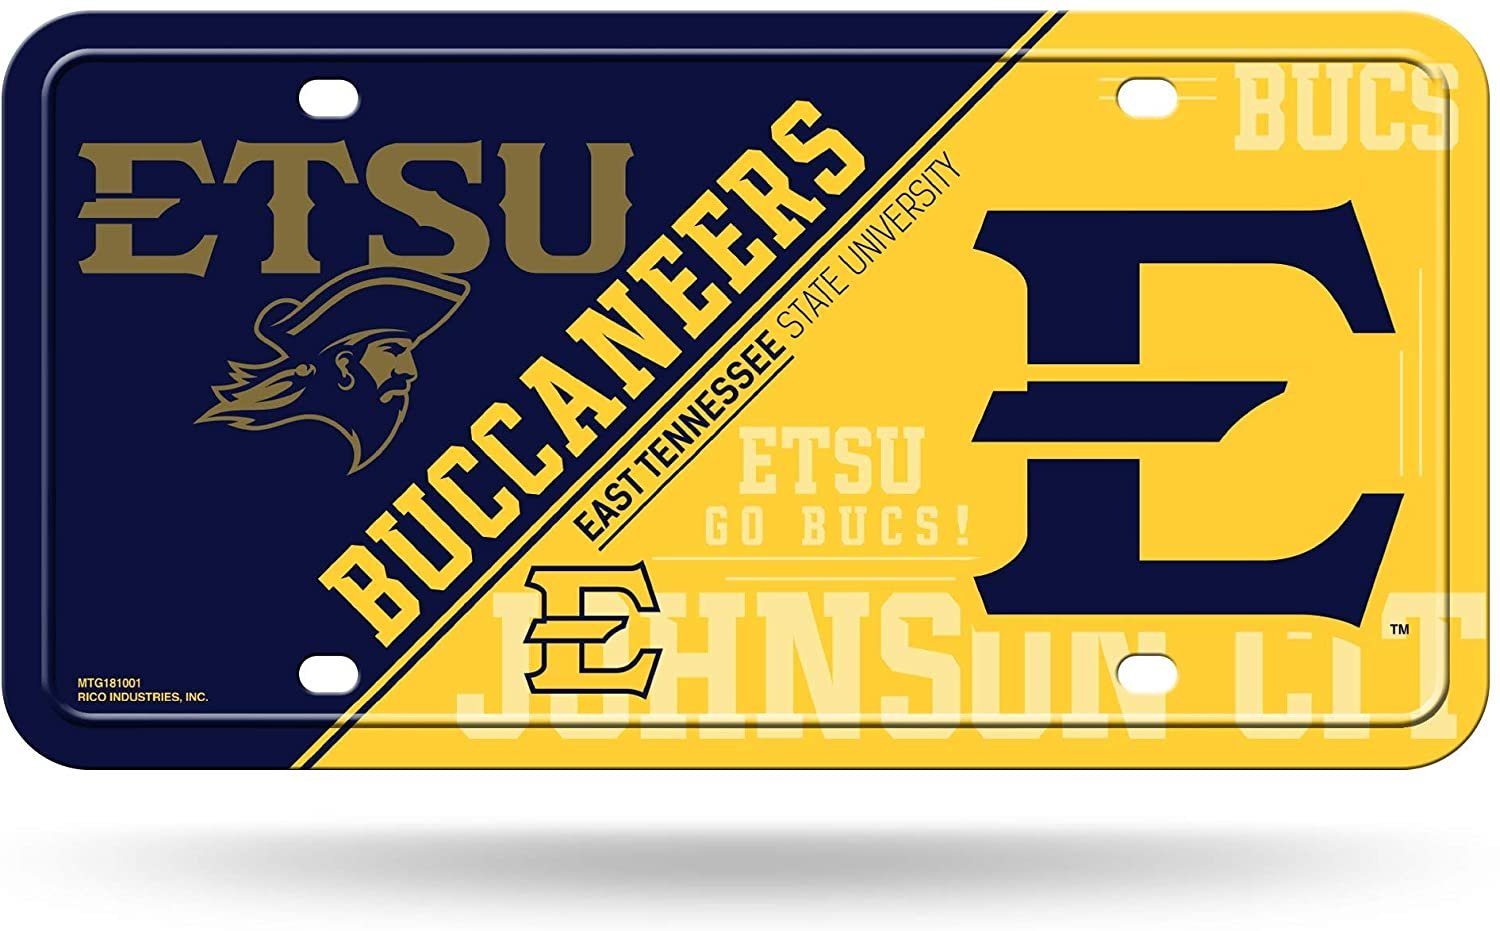 East Tennessee State Buccaneers Metal Auto Tag License Plate, Split Design, 6x12 Inch